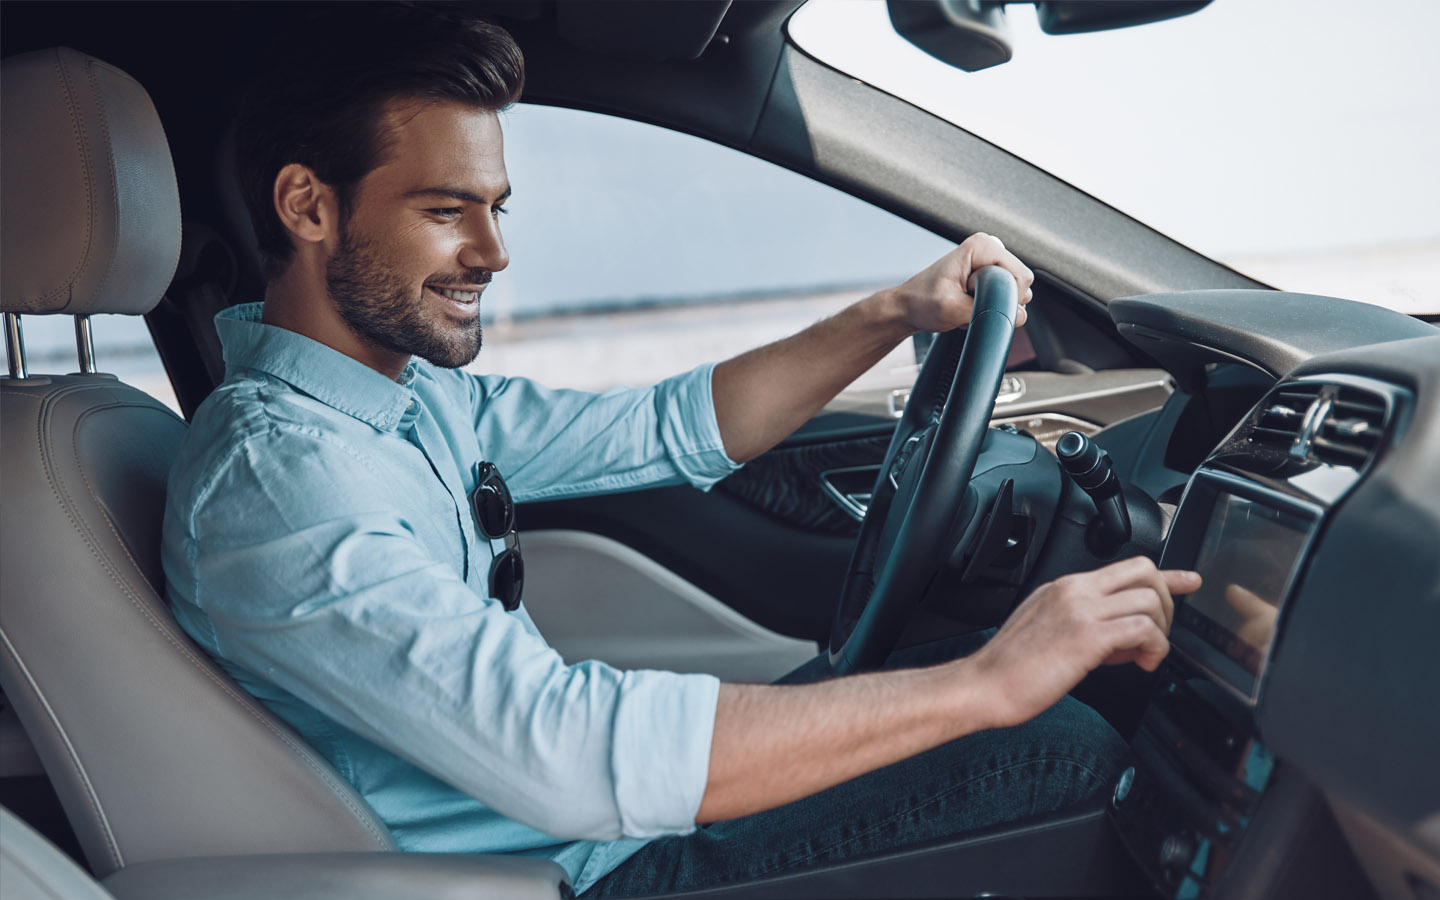 what is highway hypnosis? happy man listening to car music to avoid highway hypnosis